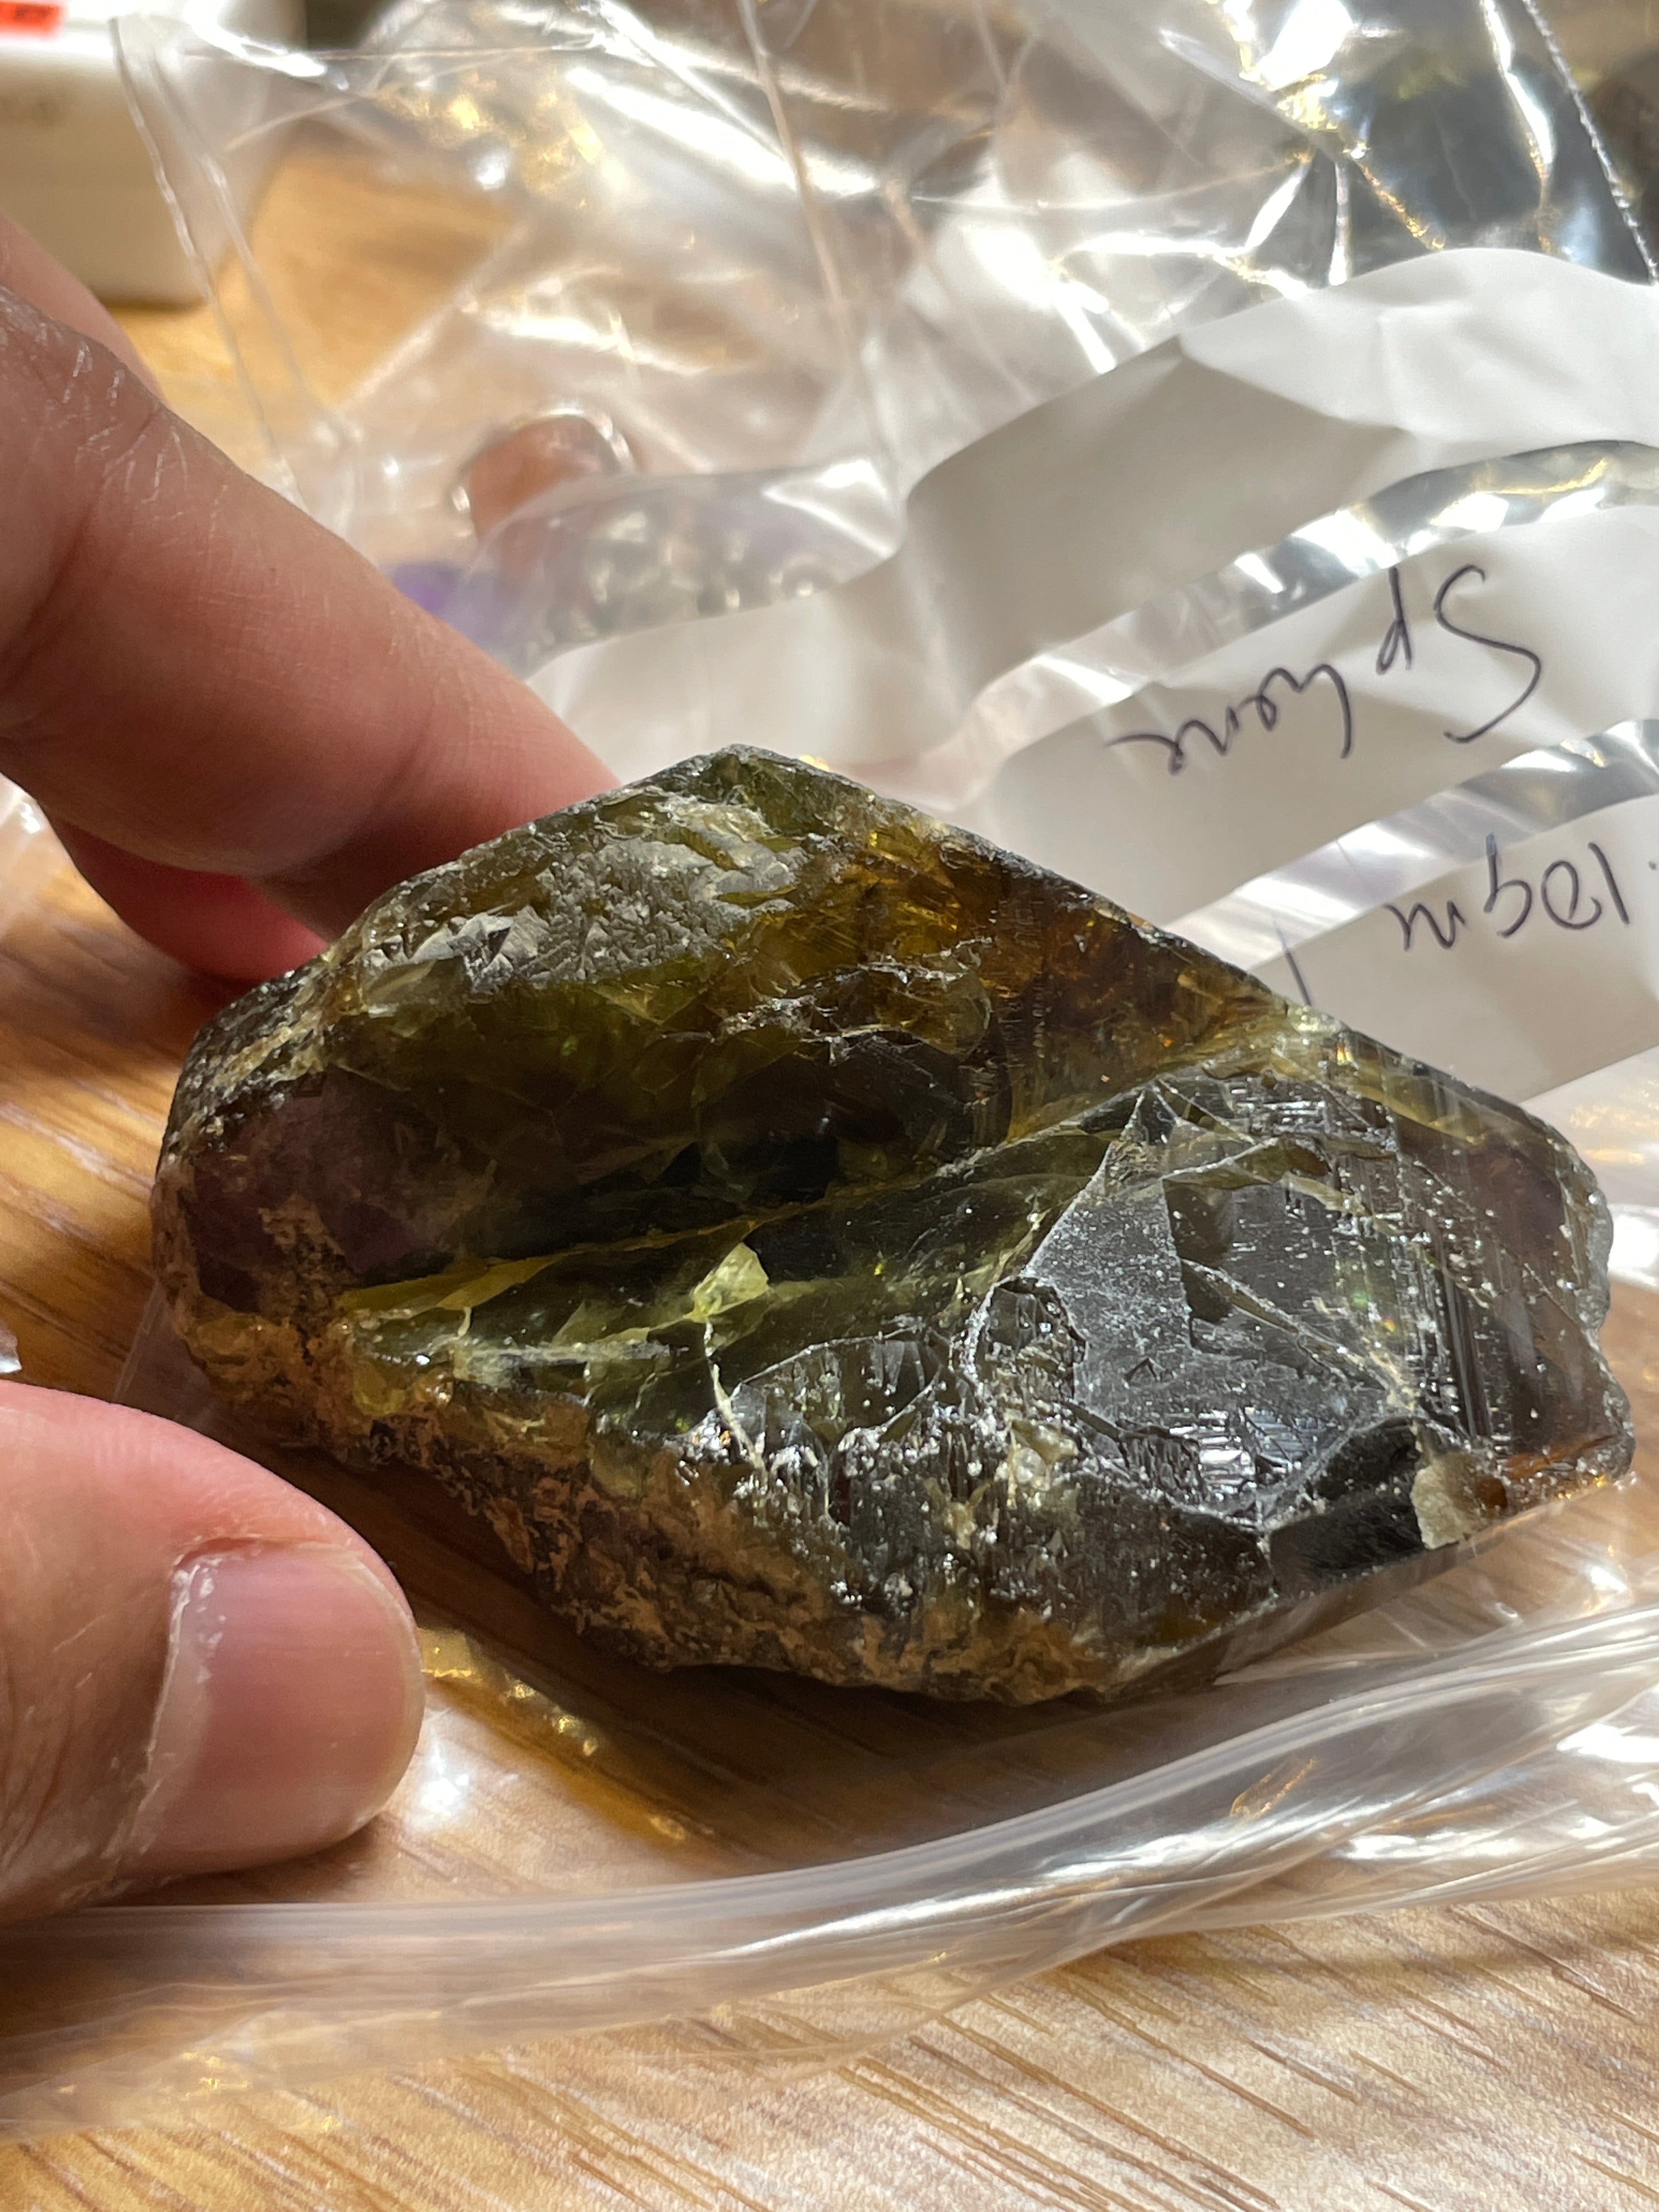 130.10Gm / 650.50Ct Sphene Crystal From Tanzania. Superb Rare Piece. 71.60 X 50.00 33.20Mm